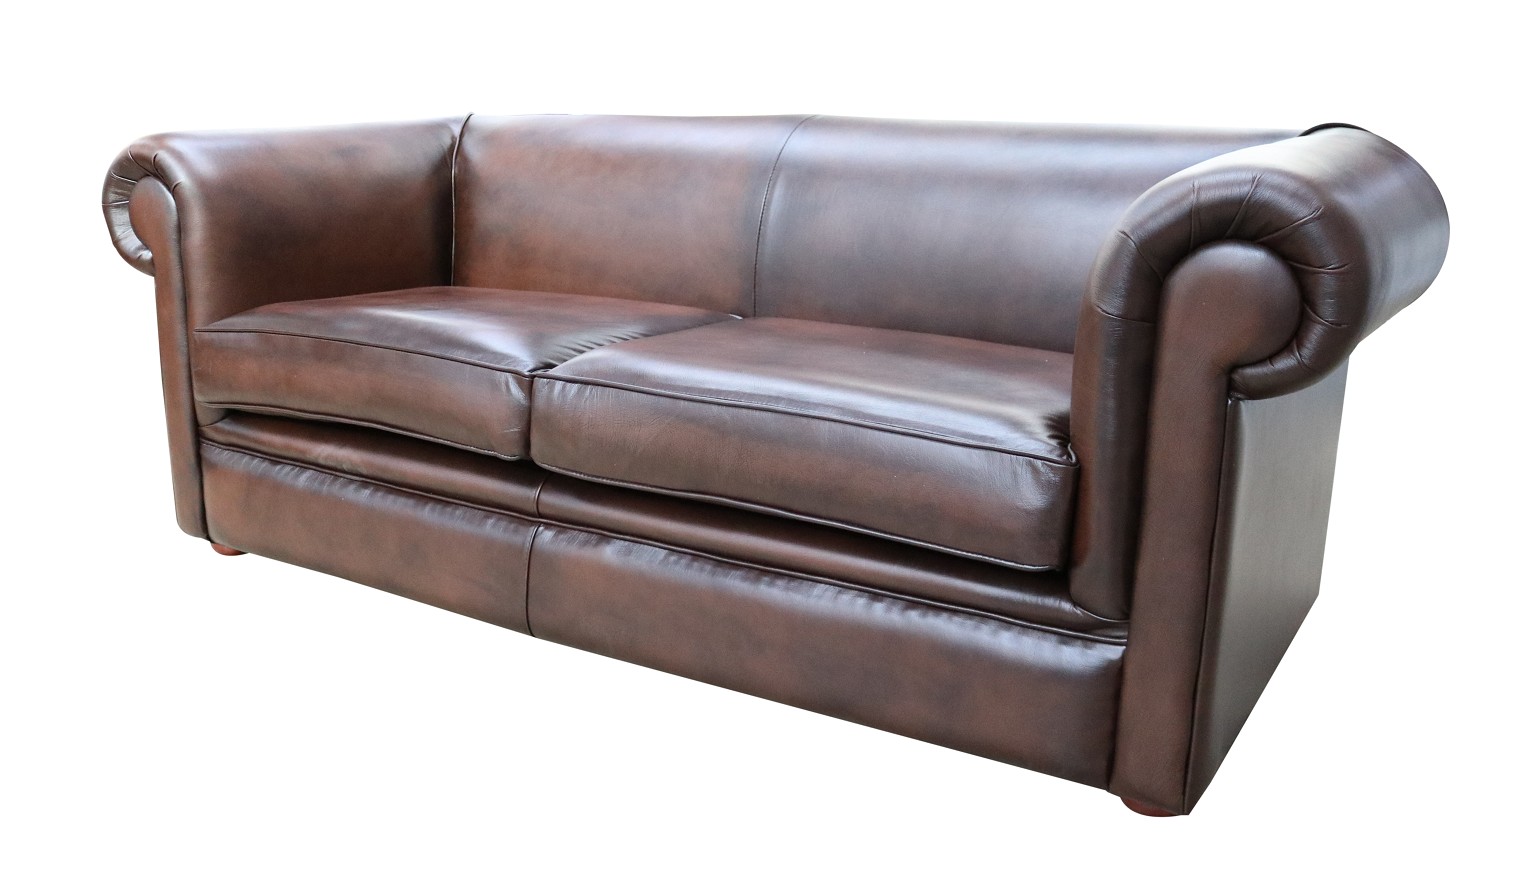 Product photograph of Chesterfield 1930 039 S 3 Seater Antique Brown Leather Sofa Settee In Classic Style from Chesterfield Sofas.